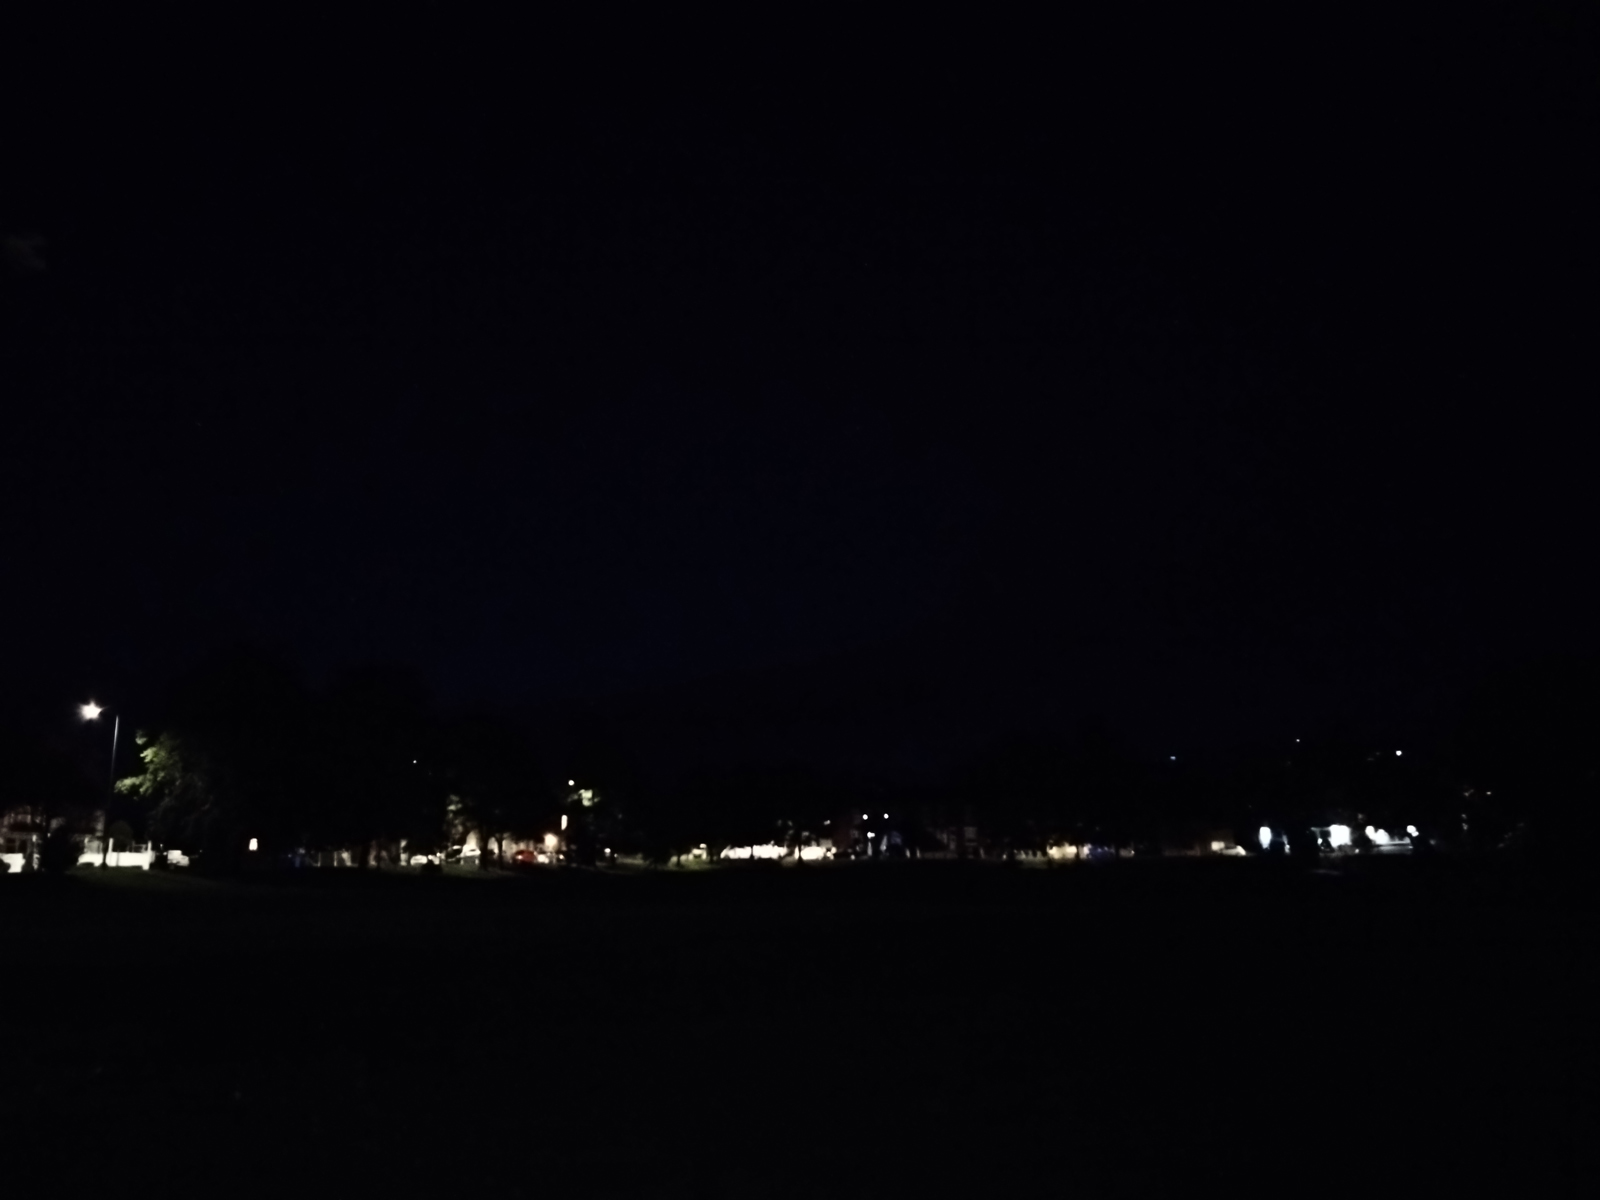 Sony Xperia 10 IV camera sample showing an open green space in the dark